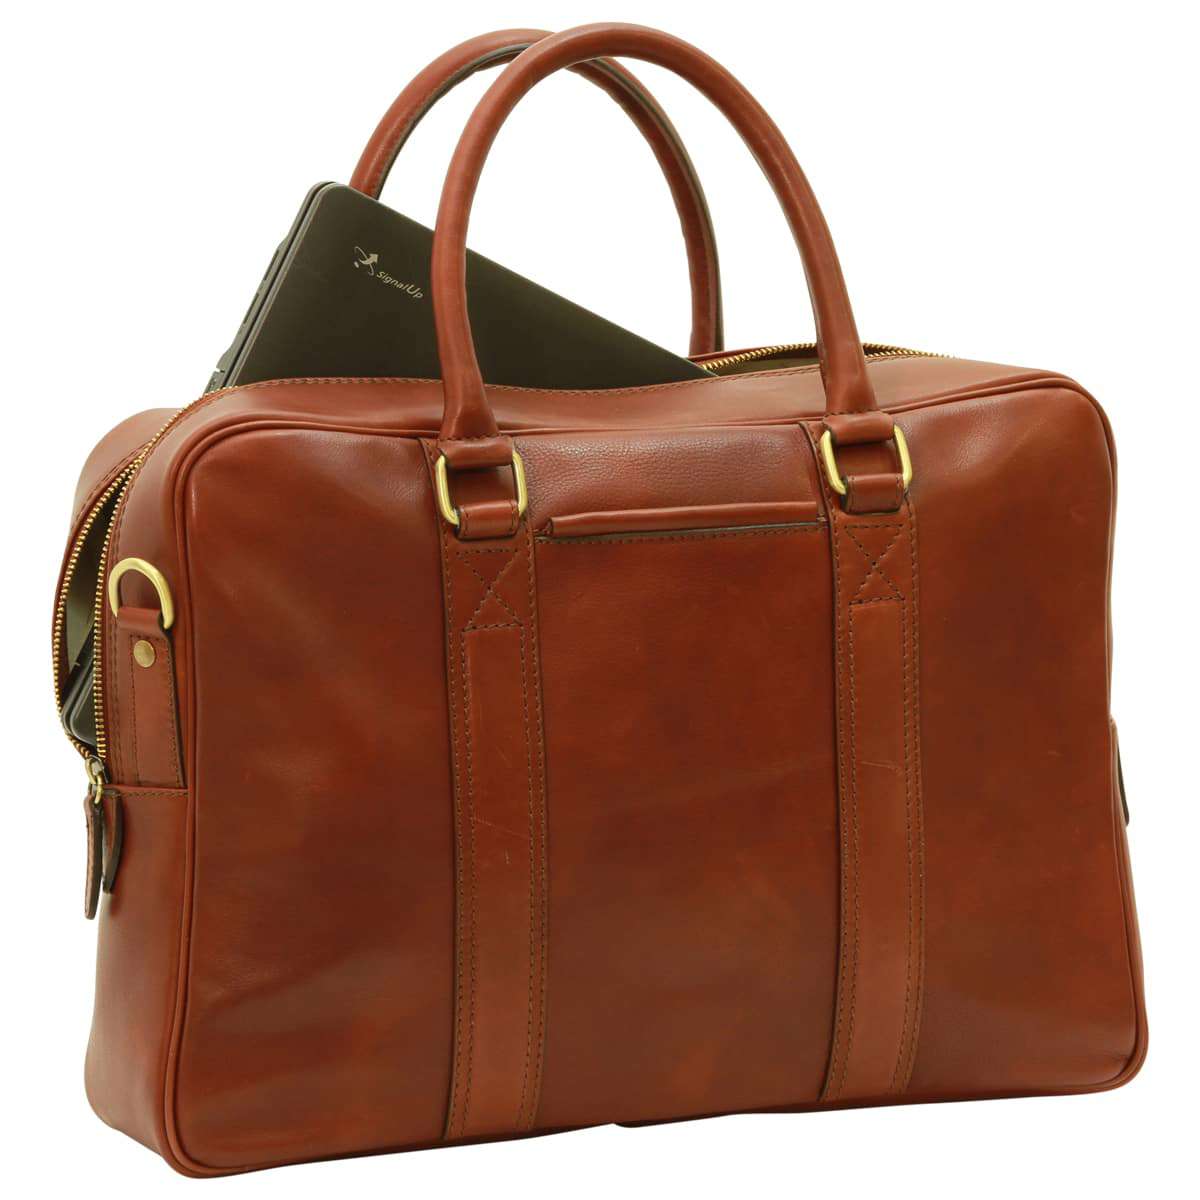 Soft Calfskin Leather Briefcase - Brown | 030191MA US | Old Angler Firenze